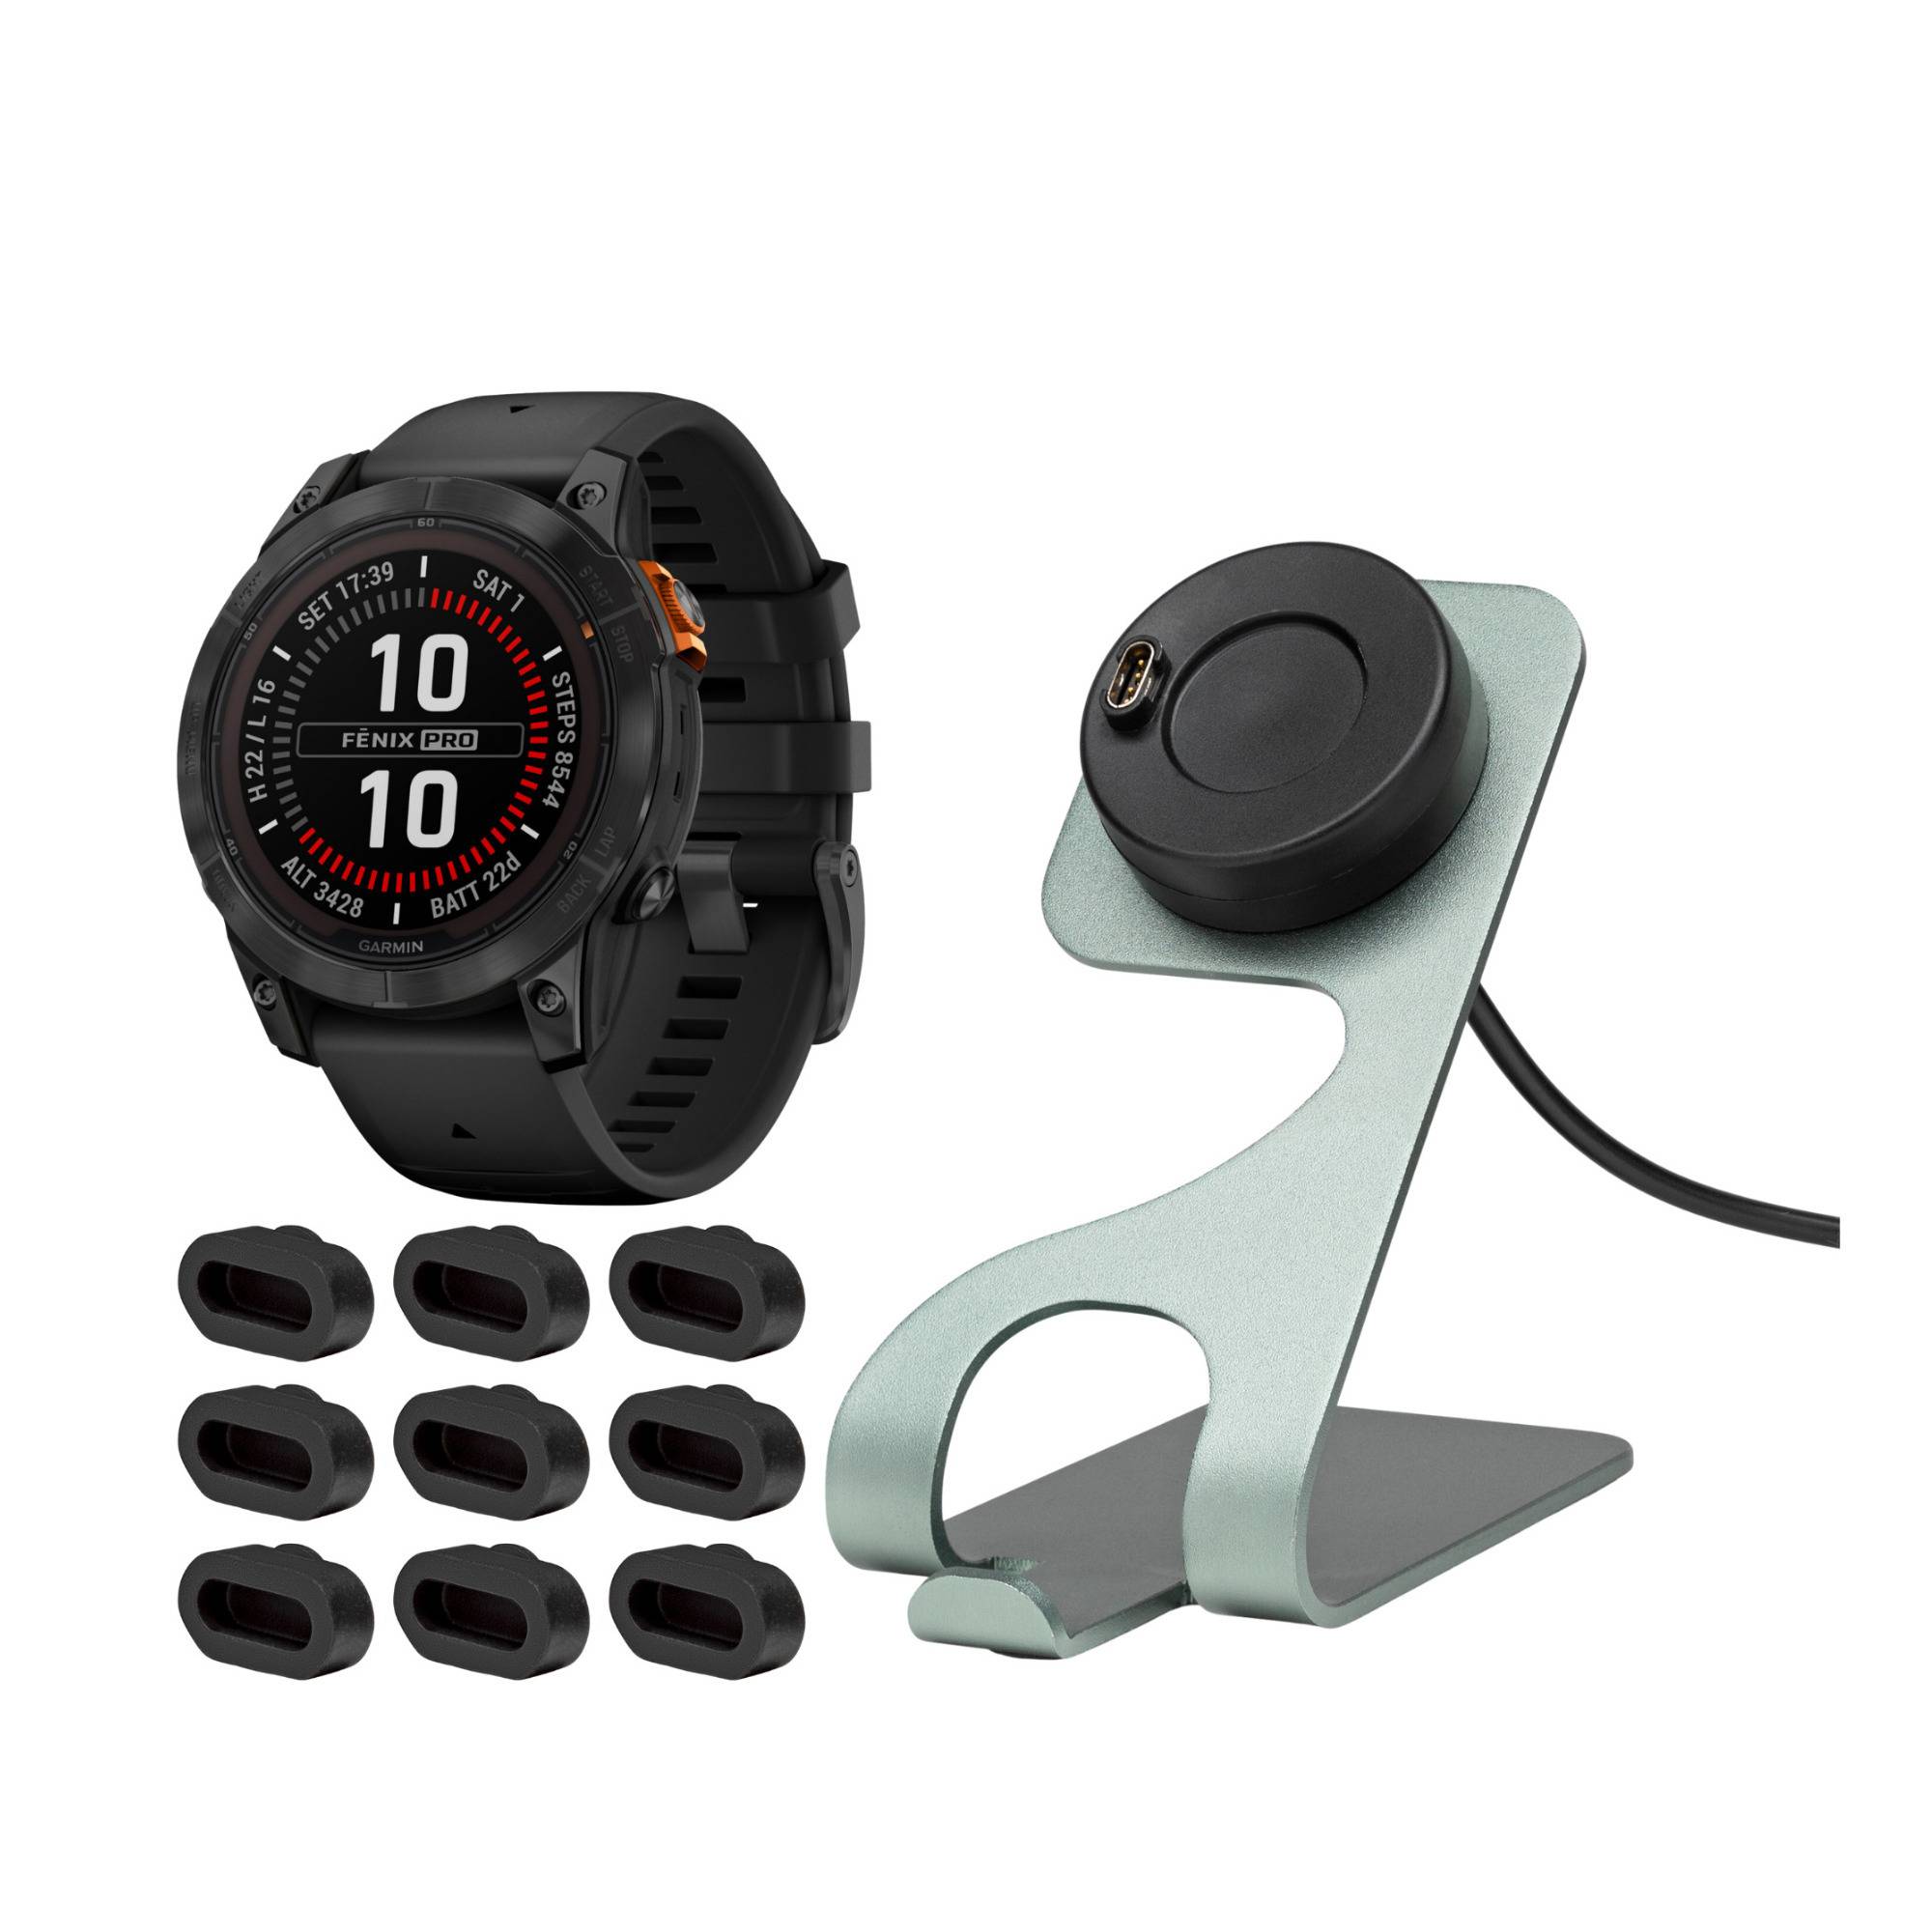 Garmin fenix 7 Pro Solar Multisport GPS Smartwatch (Silver) with Charging Stand and Port Plugs